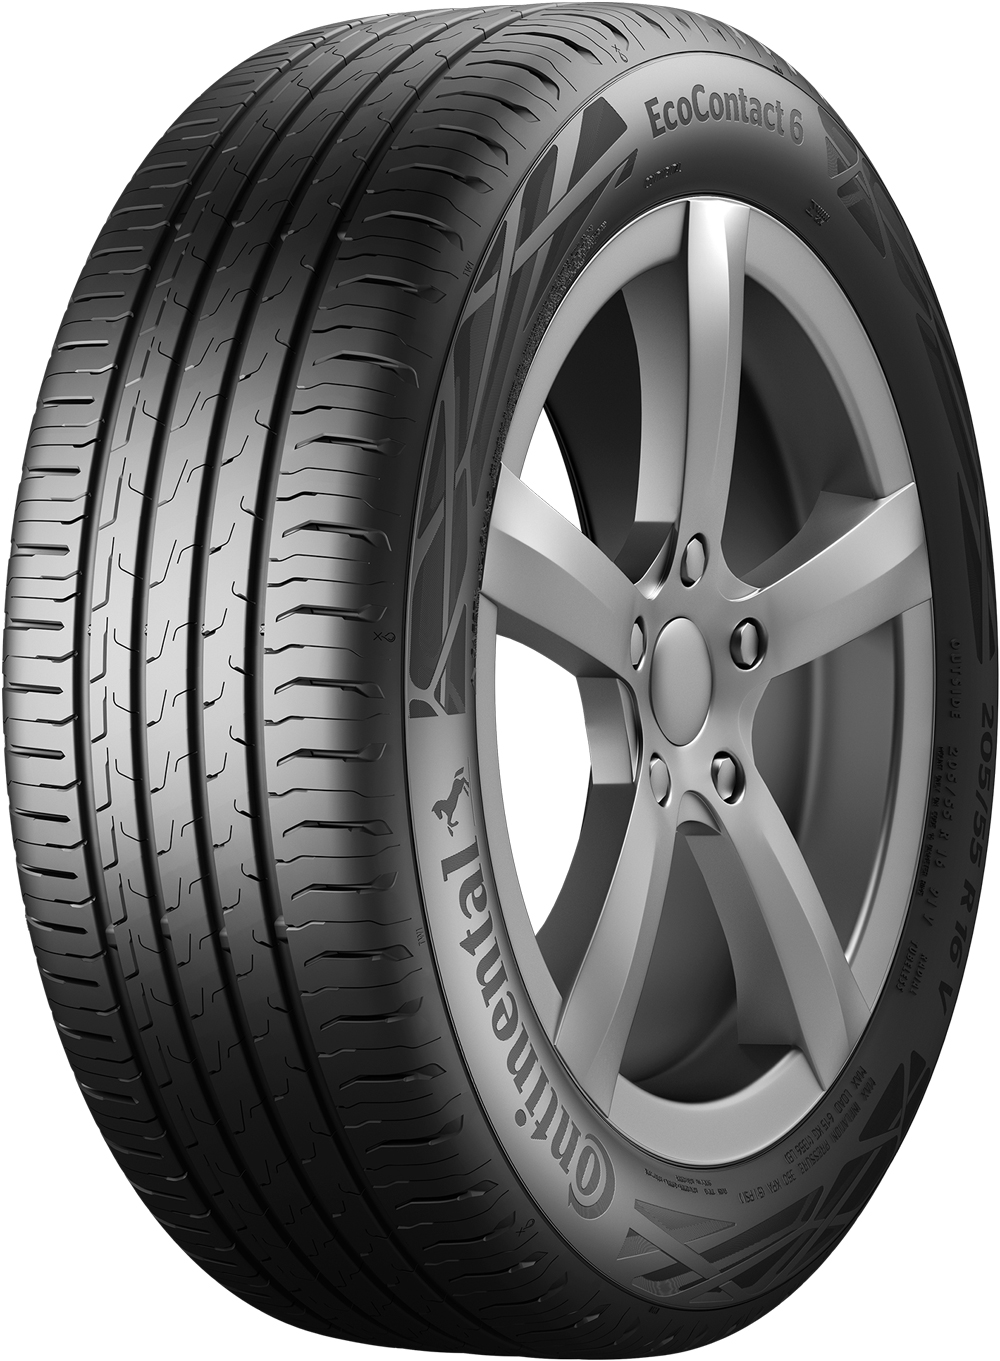 CONTINENTAL ECOCONTACT 6 205/55R16 2W